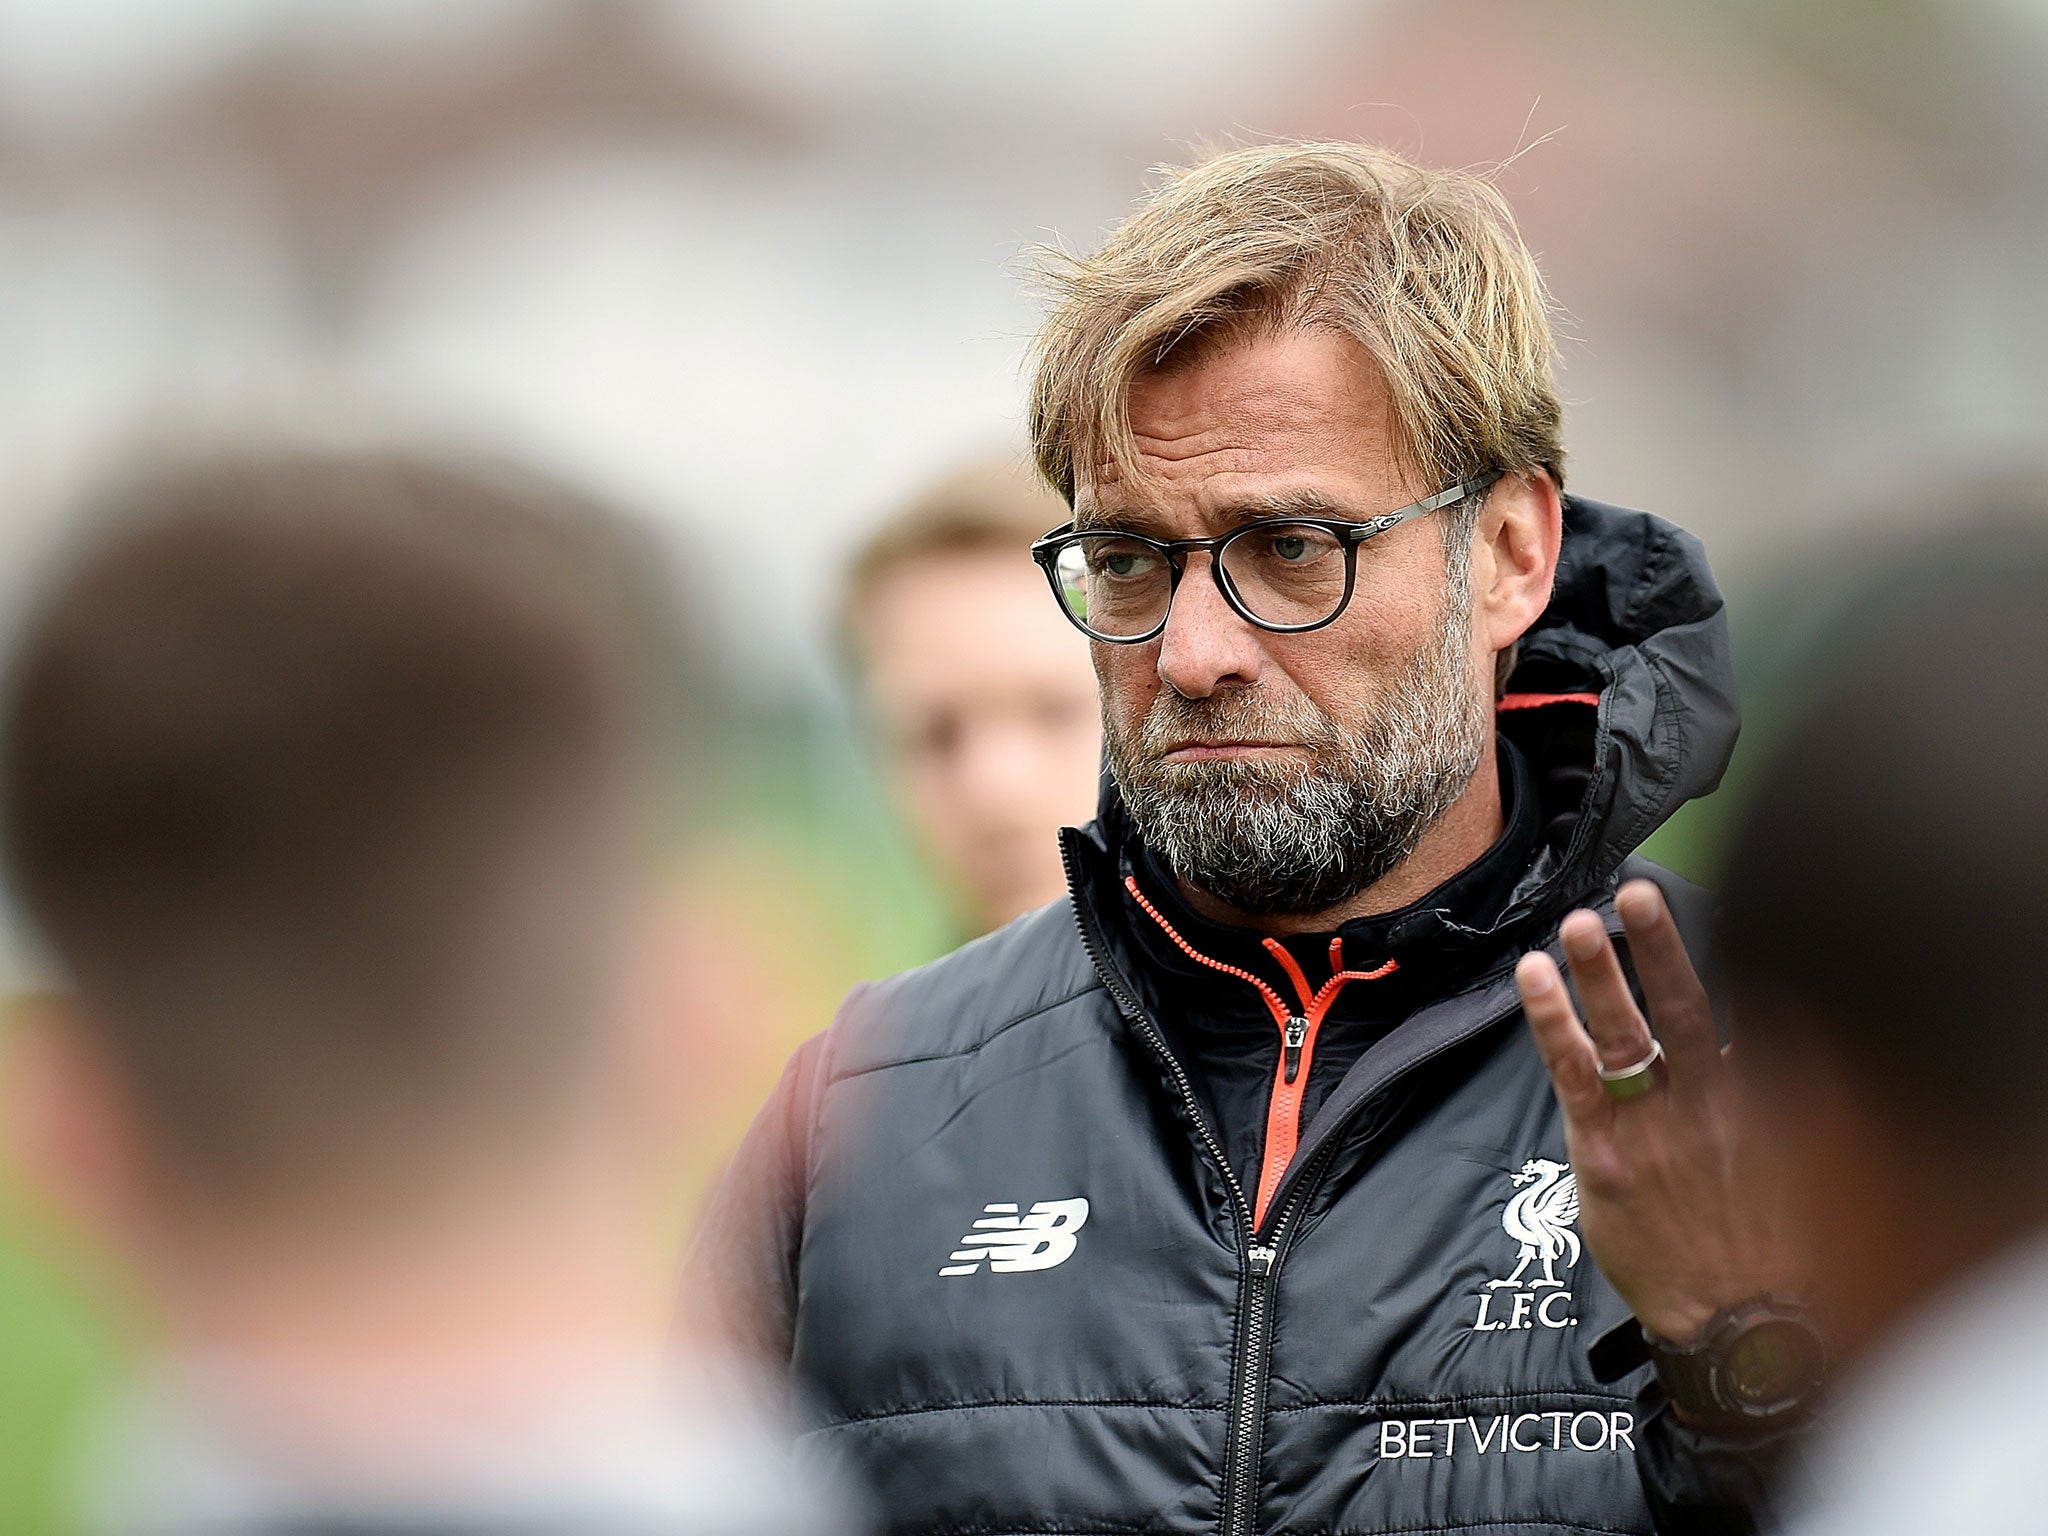 Klopp has said Mane's absence will do little to impact the side's defensive abilities